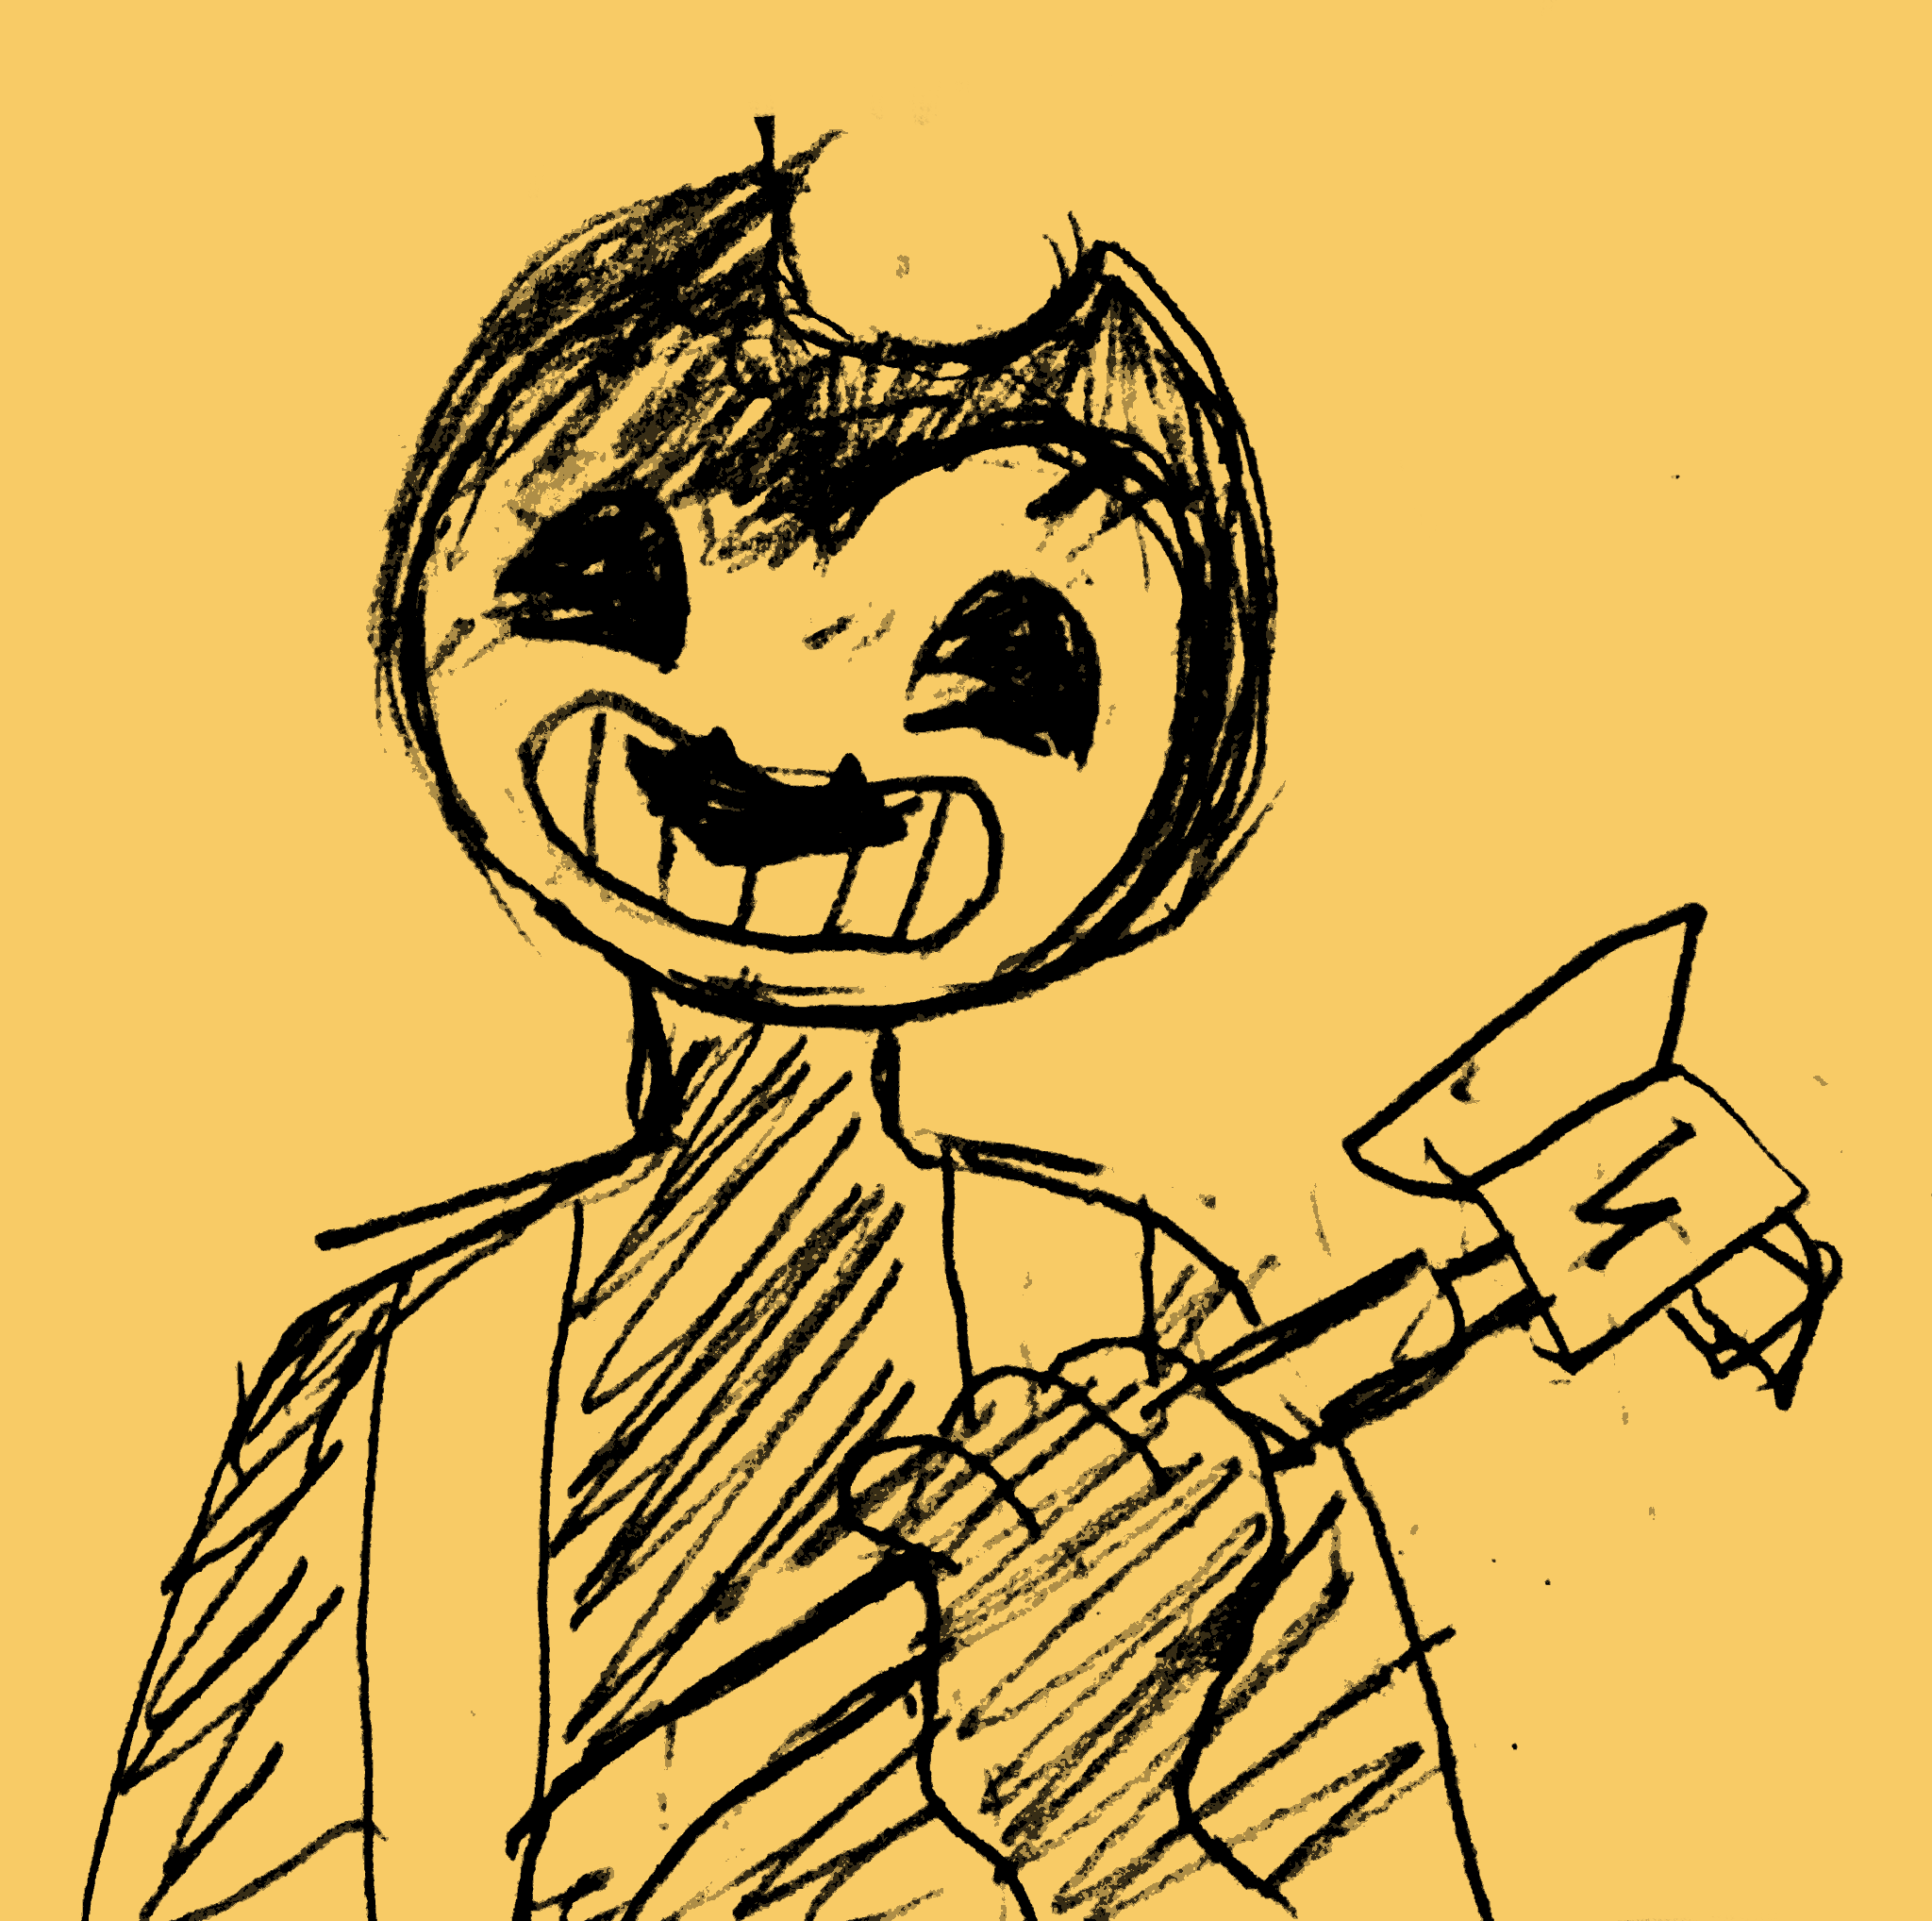 ID: a drawing of Sammy wearing his Bendy mask and holding an axe. His head is tilted to the side. /End ID